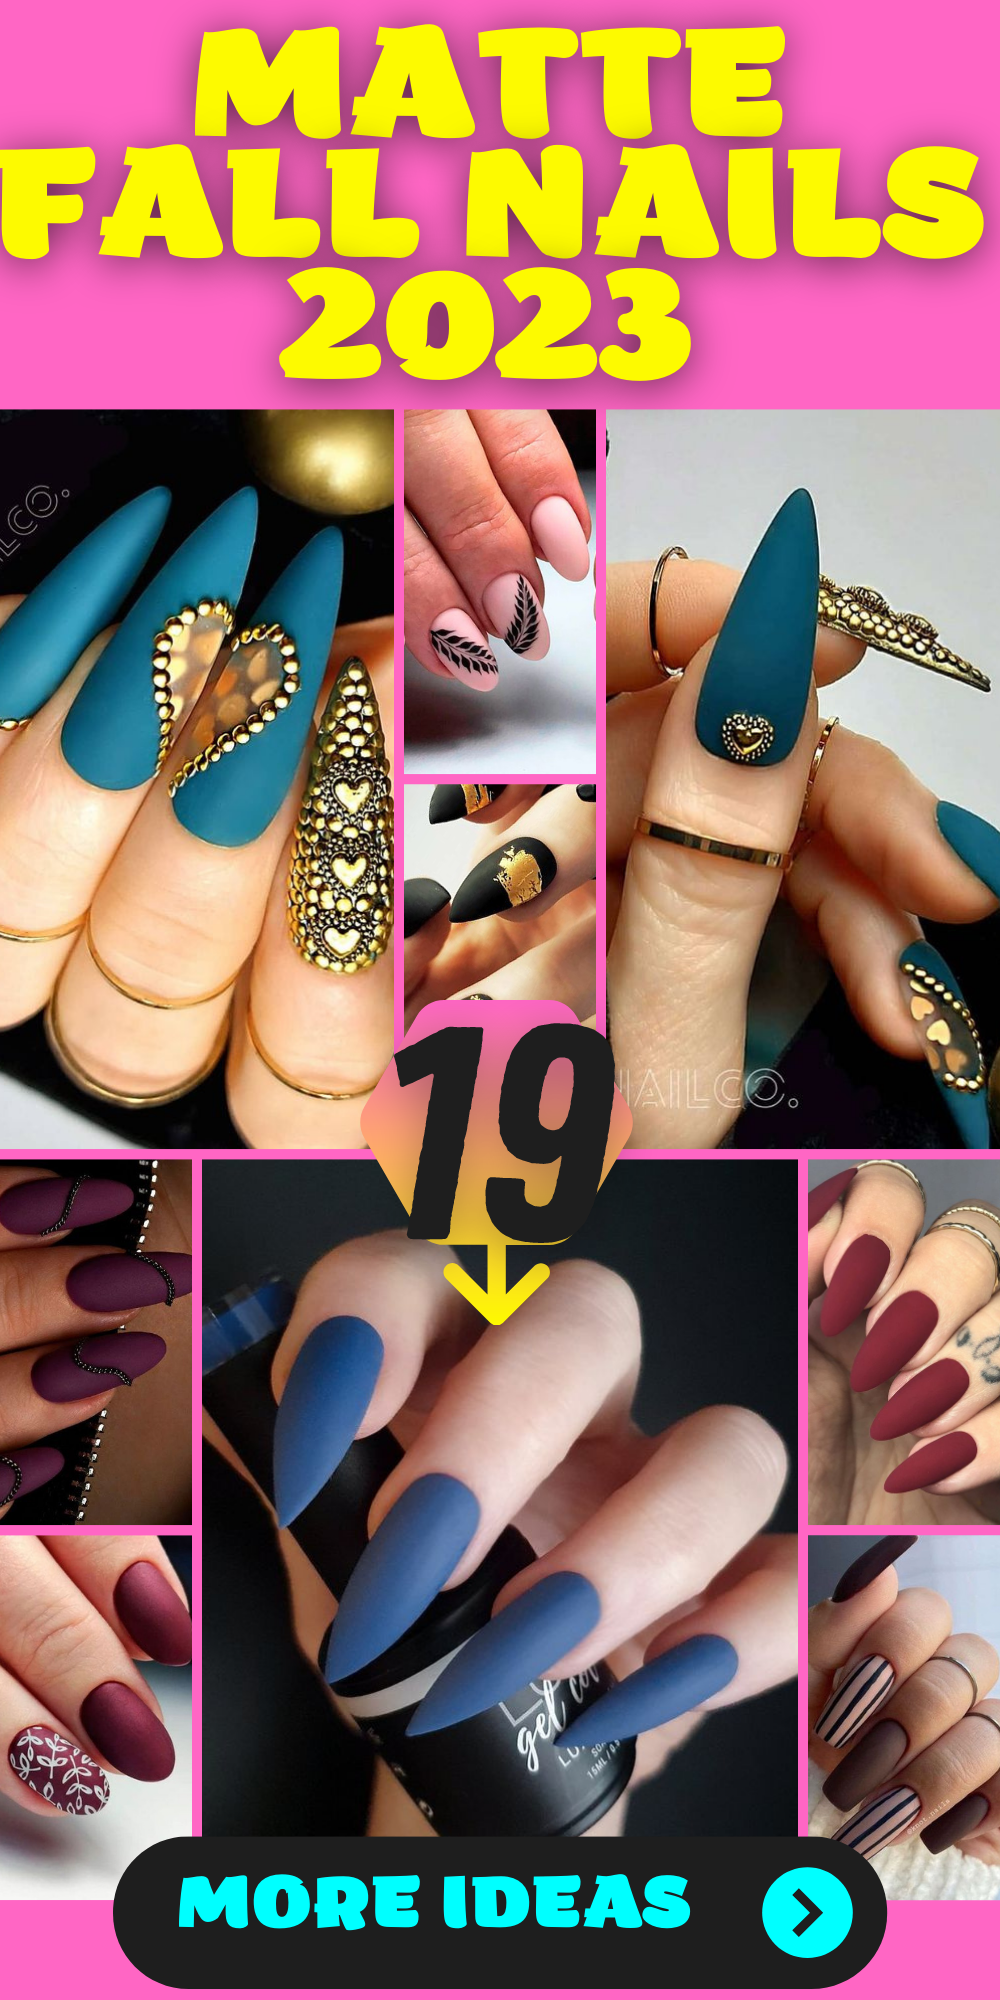 19 Chic Matte Fall Nail Ideas for 2023: Embrace the Modern and Edgy ...